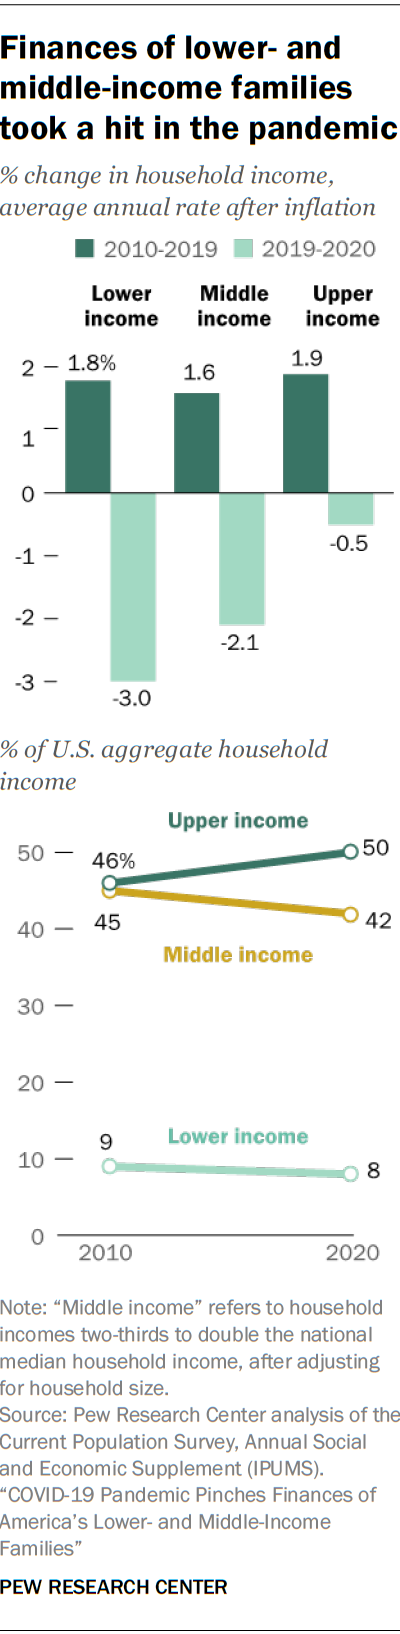 Chart showing finances of lower- and middle-income families took a hit in the pandemic